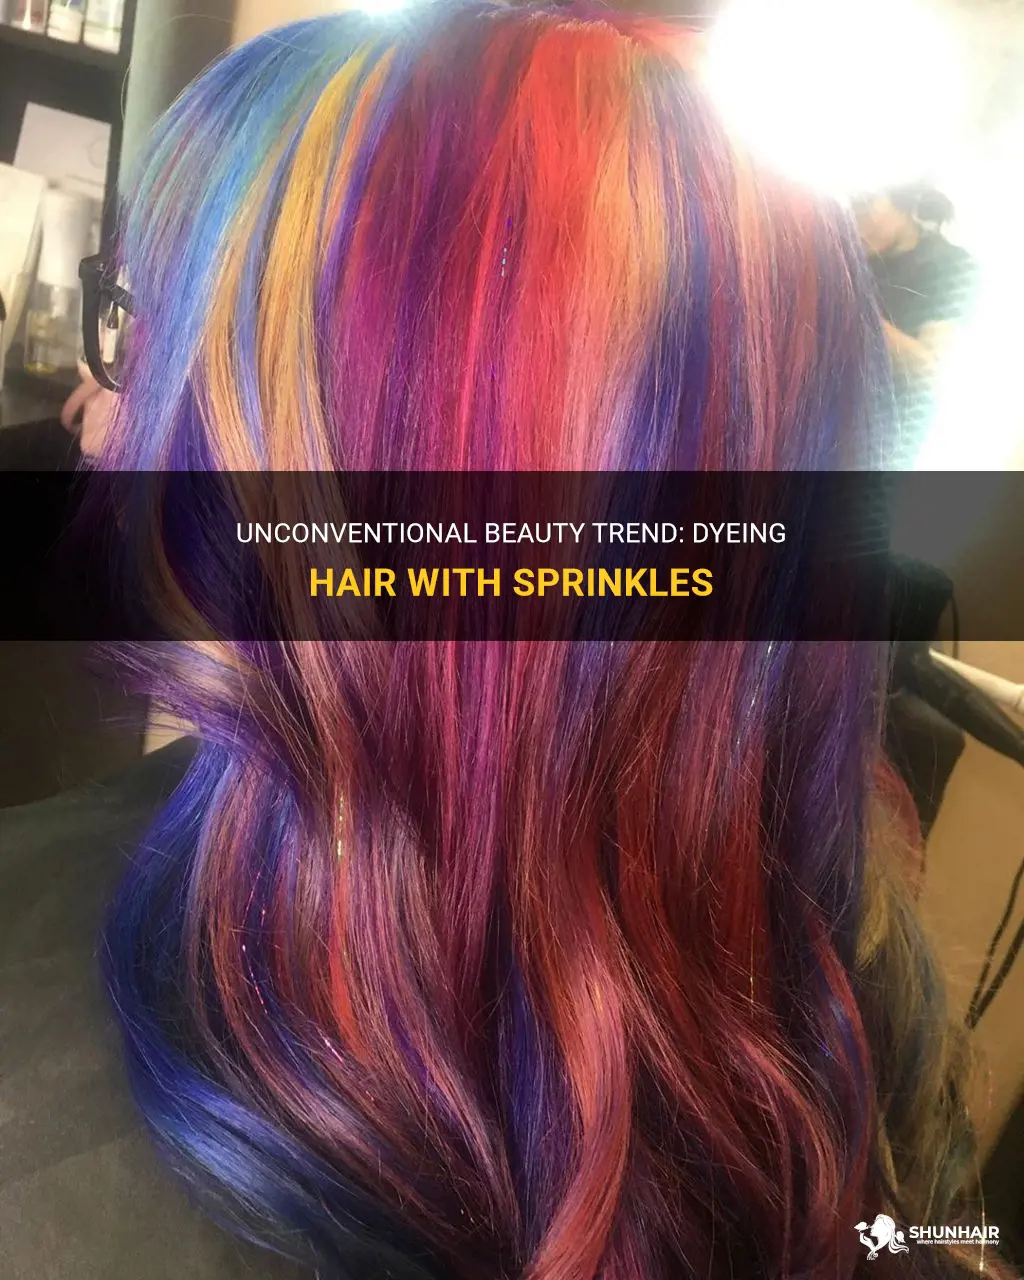 can you dye hair with sprinkles